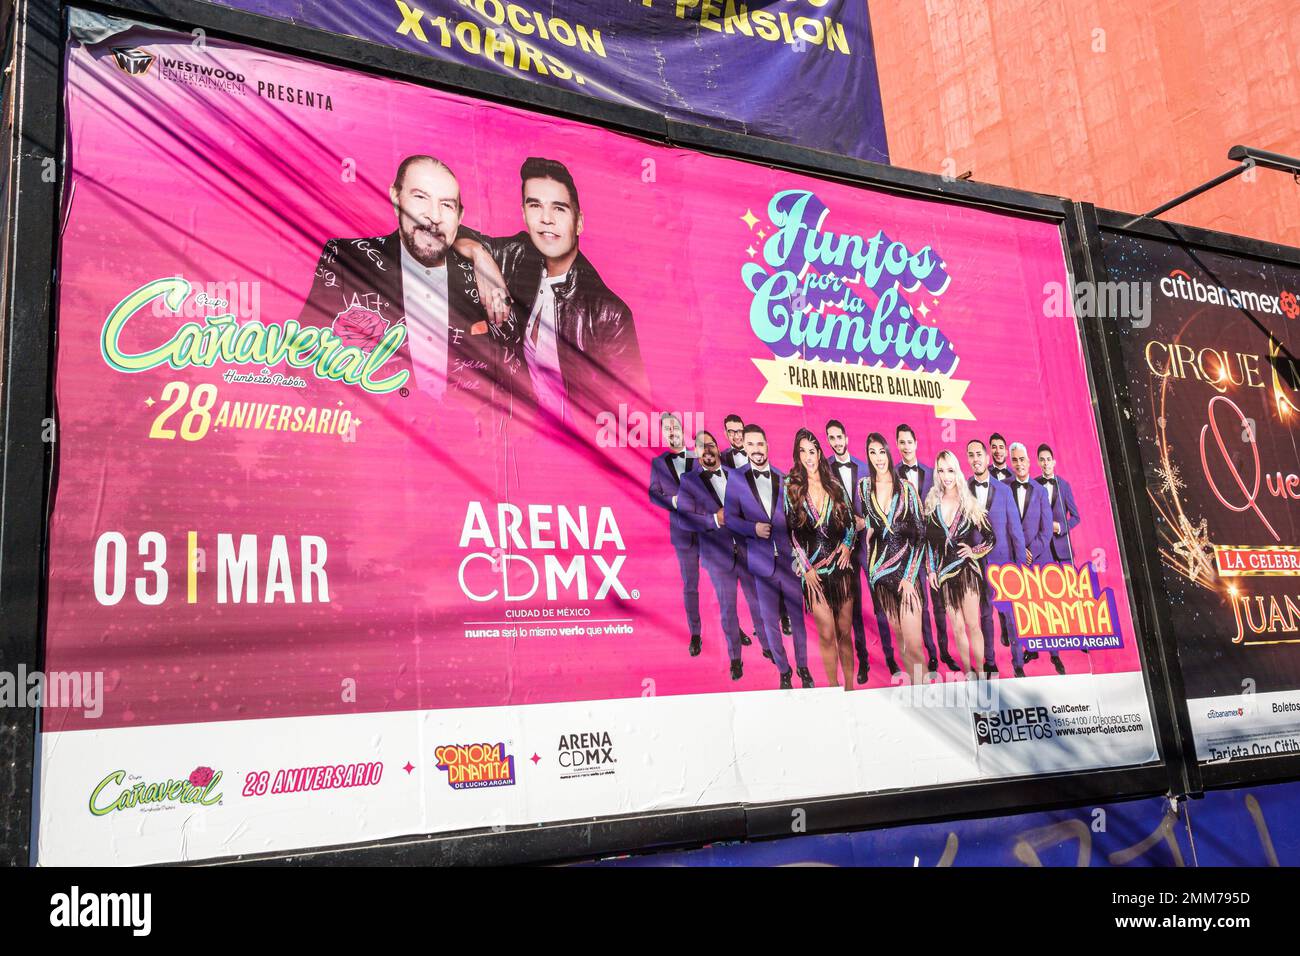 Mexico City,concert poster Grupo Canaveral cumbia folk music,sign signs information billboard,promoting promotion,advertising banner Stock Photo